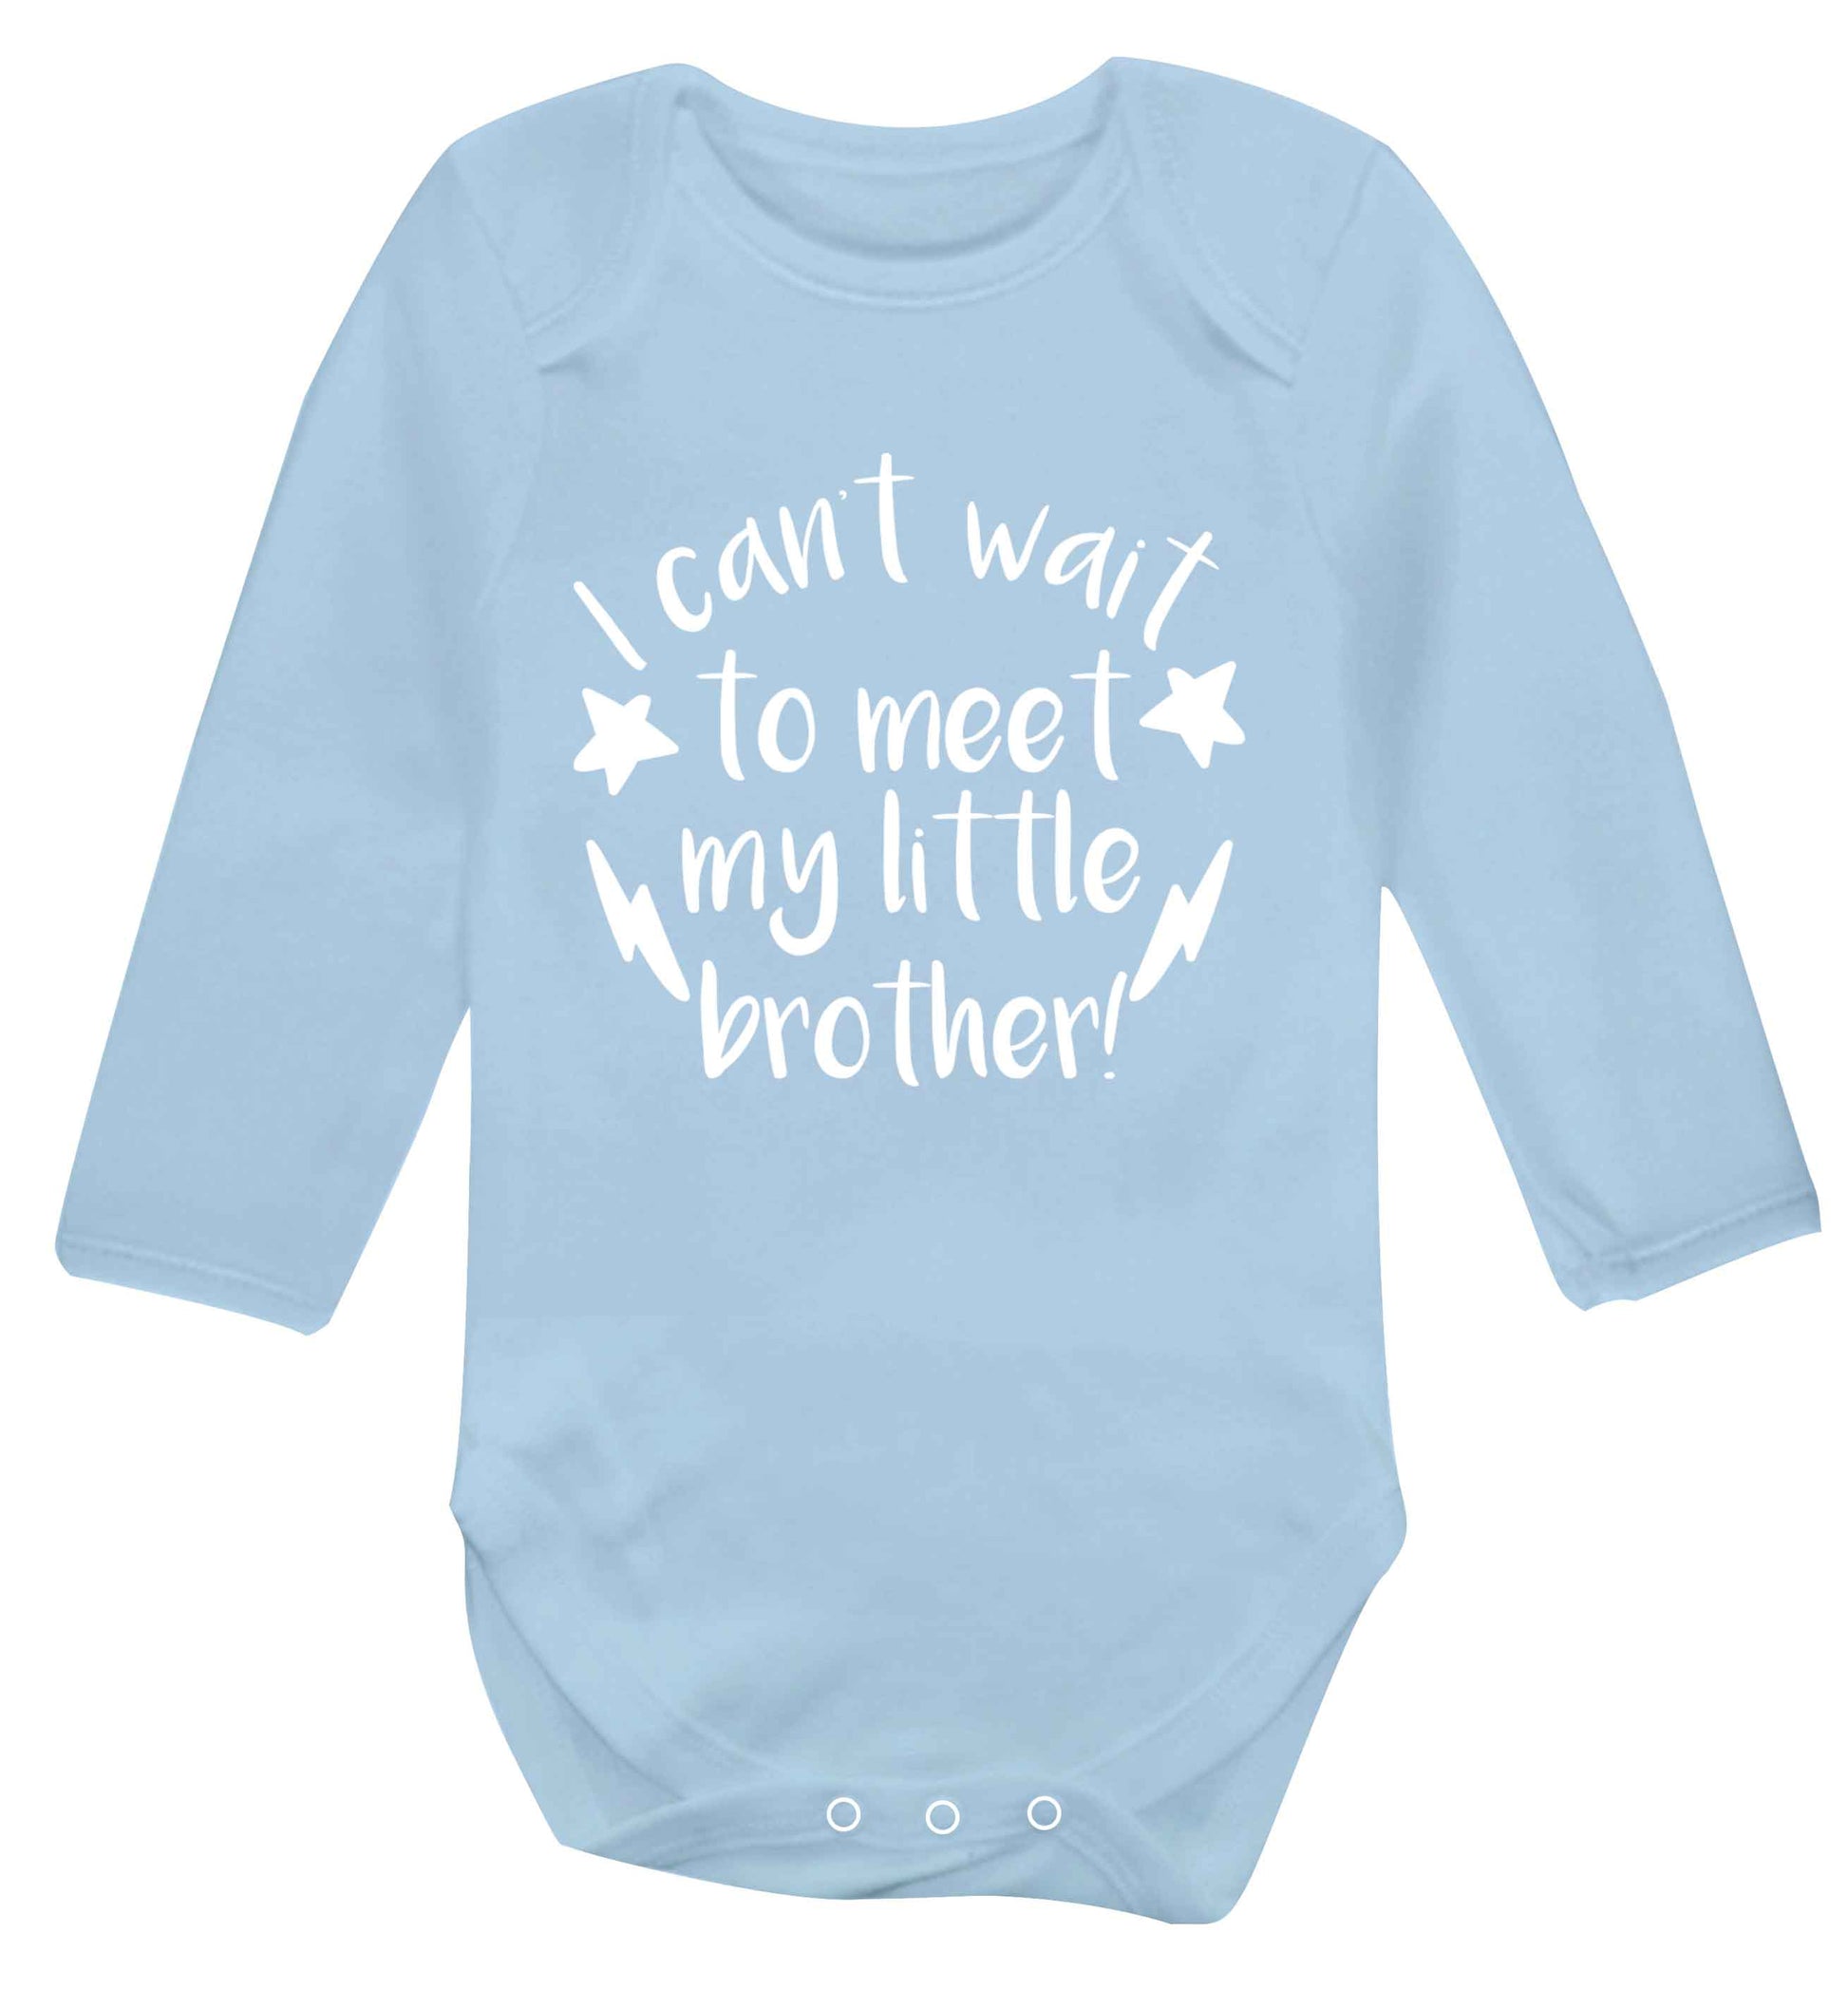 I can't wait to meet my sister! Baby Vest long sleeved pale blue 6-12 months